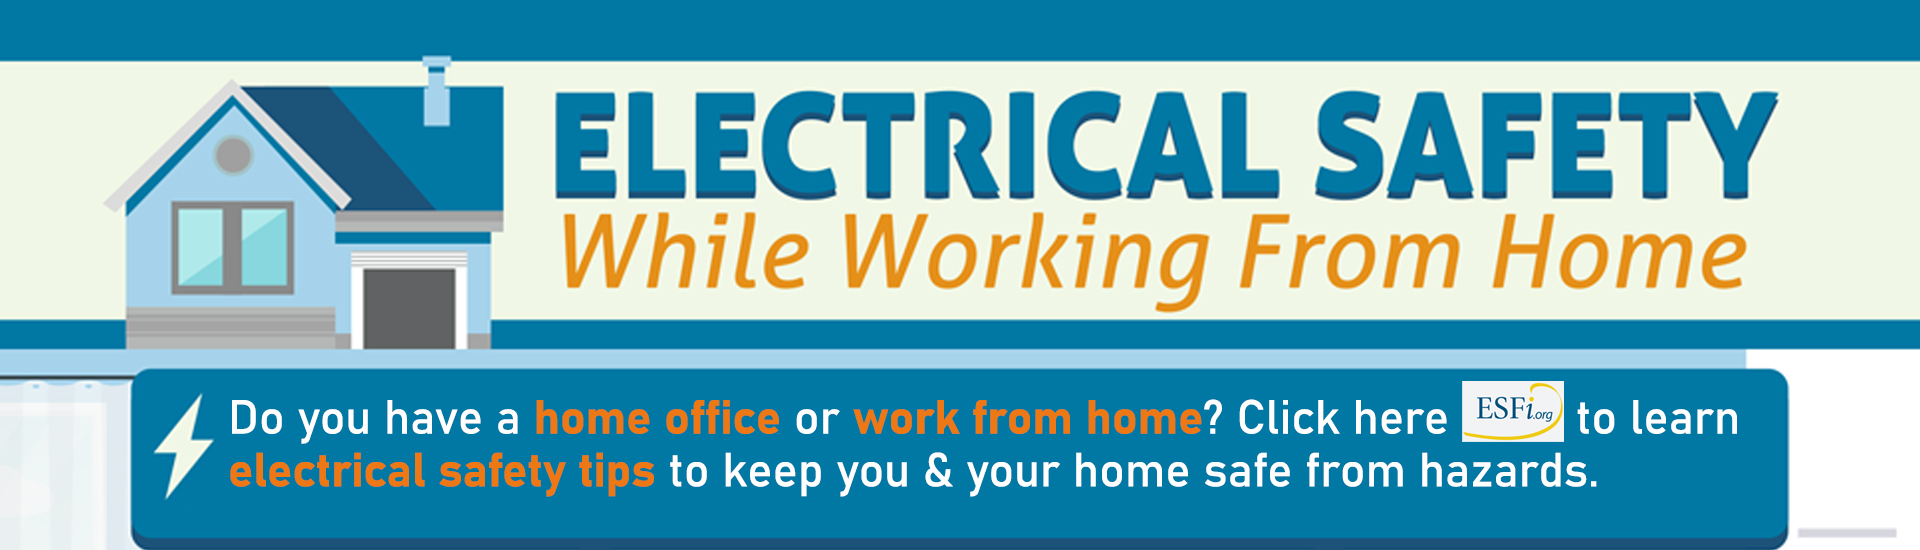 Electrical safety while working from home.